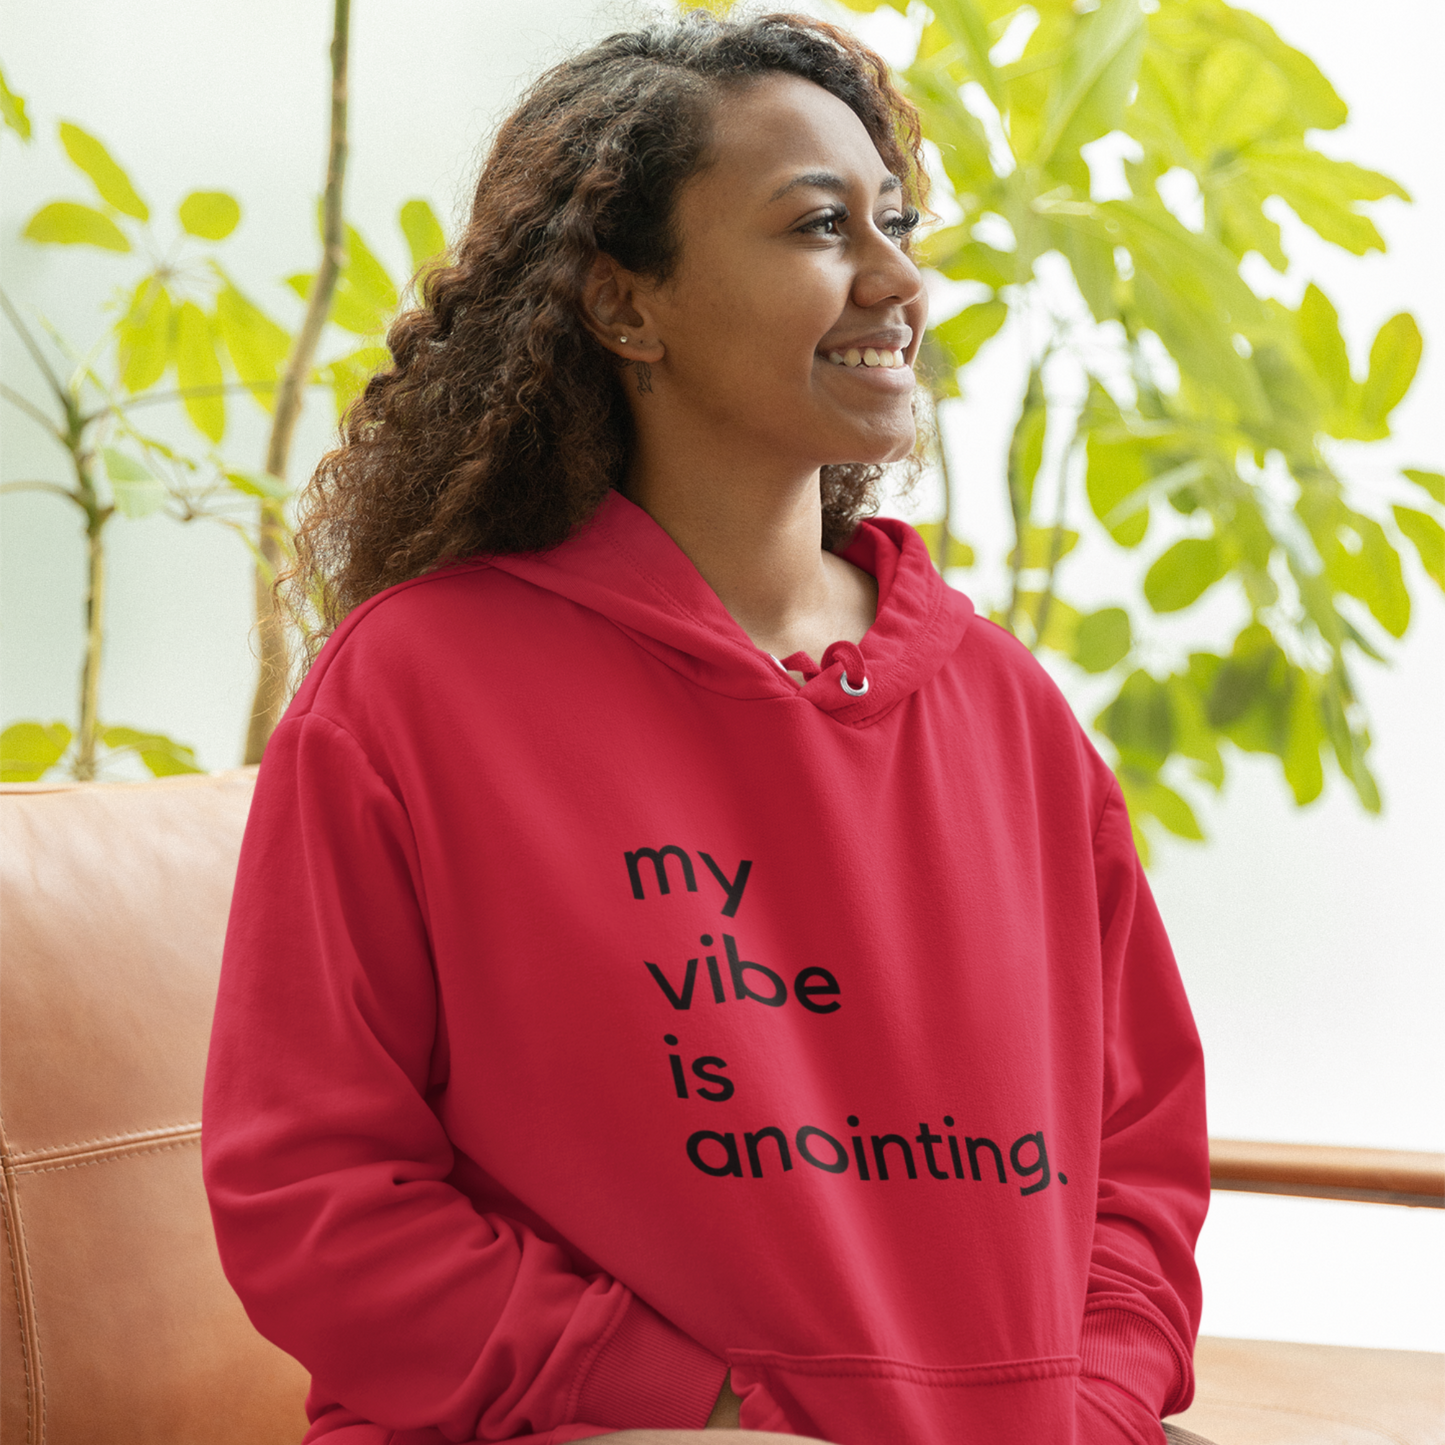 My Vibe is Anointing (Graphic Black Text) Unisex Heavy Blend Hoodie - Style: Gildan 18500